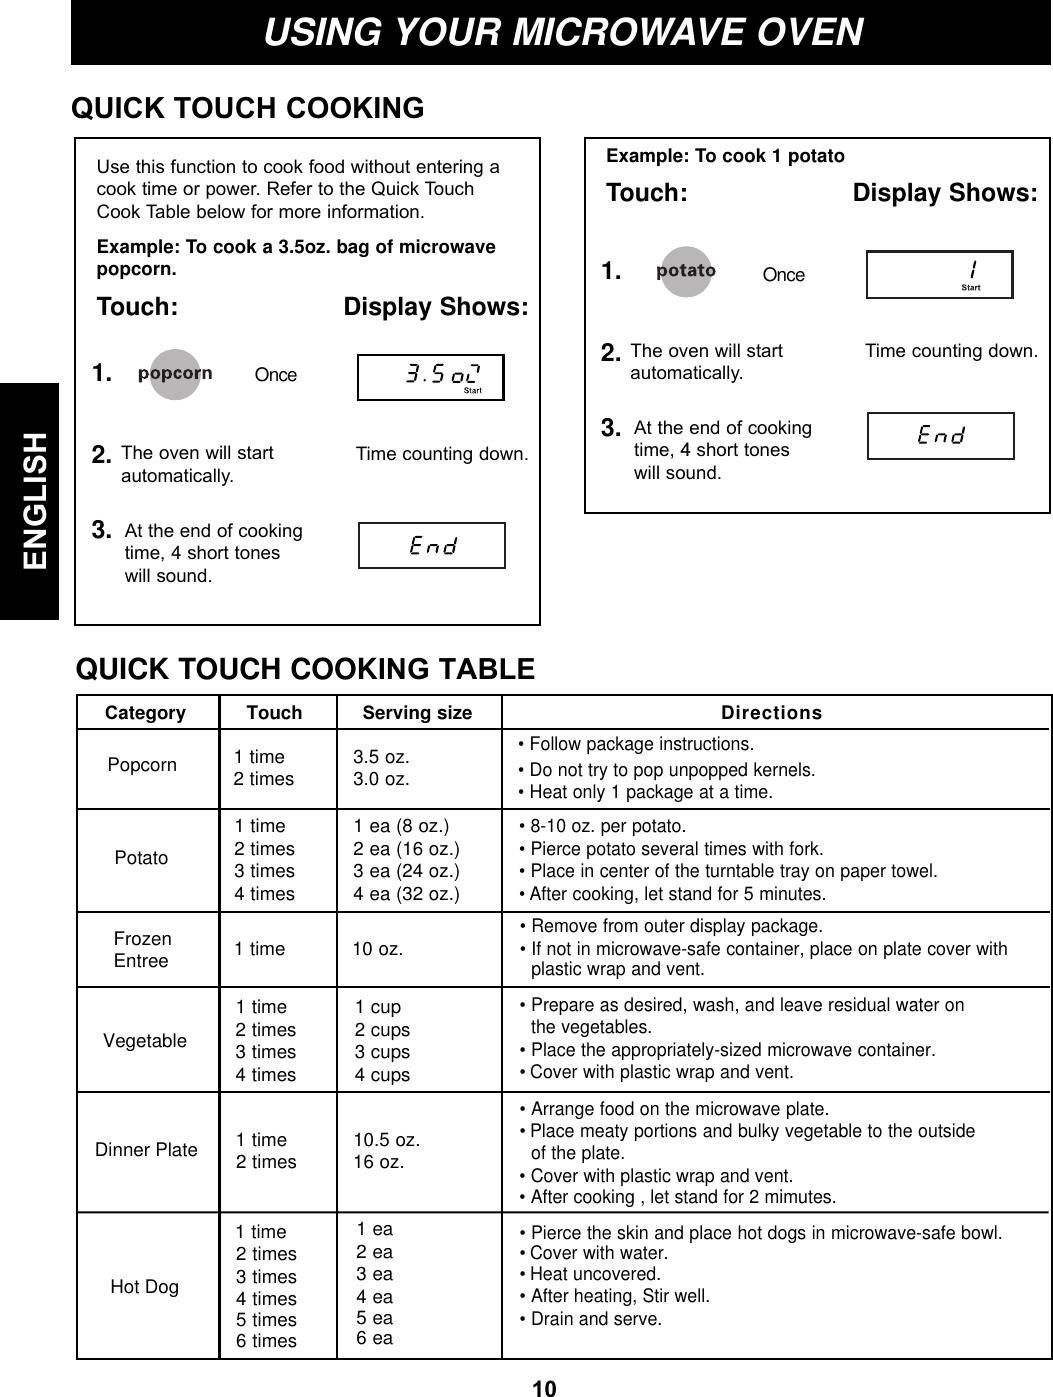 10ENGLISHUSING YOUR MICROWAVE OVENTime counting down.The oven will startautomatically.At the end of cookingtime, 4 short toneswill sound.Example: To cook 1 potatoTouch: Display Shows:1.2.3.QUICK TOUCH COOKING Time counting down.The oven will startautomatically.At the end of cookingtime, 4 short tones will sound.Use this function to cook food without entering acook time or power. Refer to the Quick TouchCook Table below for more information.Example: To cook a 3.5oz. bag of microwavepopcorn.Touch: Display Shows:1.2.3.OnceCategoryQUICK TOUCH COOKING TABLEPotatoPopcorn1 time2 times3 times4 times1 time2 timesServing size1 ea (8 oz.)2 ea (16 oz.)3 ea (24 oz.)4 ea (32 oz.)3.5 oz.3.0 oz.Directions• 8-10 oz. per potato.• Place in center of the turntable tray on paper towel.• Pierce potato several times with fork.• After cooking, let stand for 5 minutes.• Follow package instructions.• Do not try to pop unpopped kernels.• Heat only 1 package at a time.FrozenEntree 1 time 10 oz.• Remove from outer display package.• If not in microwave-safe container, place on plate cover withplastic wrap and vent. 1 time2 times3 times4 times1 cup2 cups3 cups4 cups• Prepare as desired, wash, and leave residual water on   the vegetables.• Place the appropriately-sized microwave container.• Cover with plastic wrap and vent.VegetableHot Dog 1 time2 times3 times4 times1 ea 2 ea 3 ea 4 ea • Arrange food on the microwave plate.• Place meaty portions and bulky vegetable to the outside • Cover with plastic wrap and vent.• Pierce the skin and place hot dogs in microwave-safe bowl.• Heat uncovered.• After heating, Stir well.Dinner Plate 1 time2 times 10.5 oz.16 oz.5 times6 times 5 ea 6 ea • Drain and serve.• After cooking , let stand for 2 mimutes.of the plate.Once• Cover with water. Touch